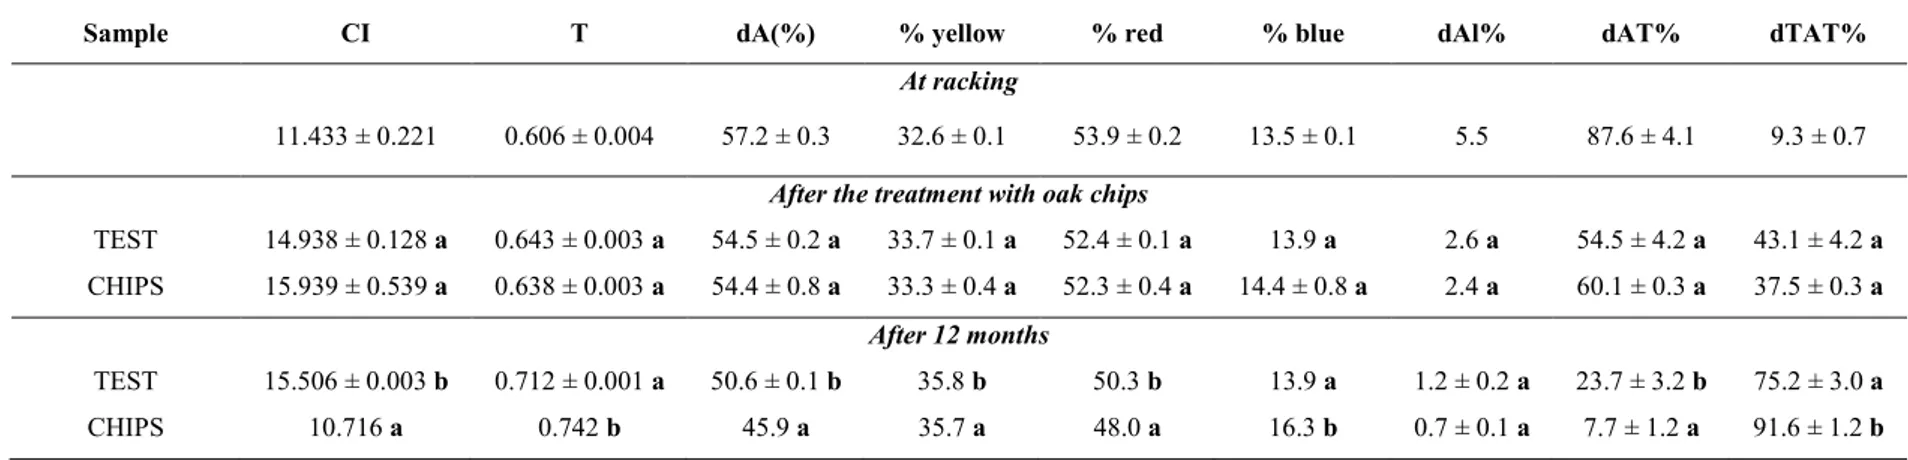 Table 19 – Colour parameters of Aglianico wine at racking, immediately after the treatment with oak chips and at 12 months of aging